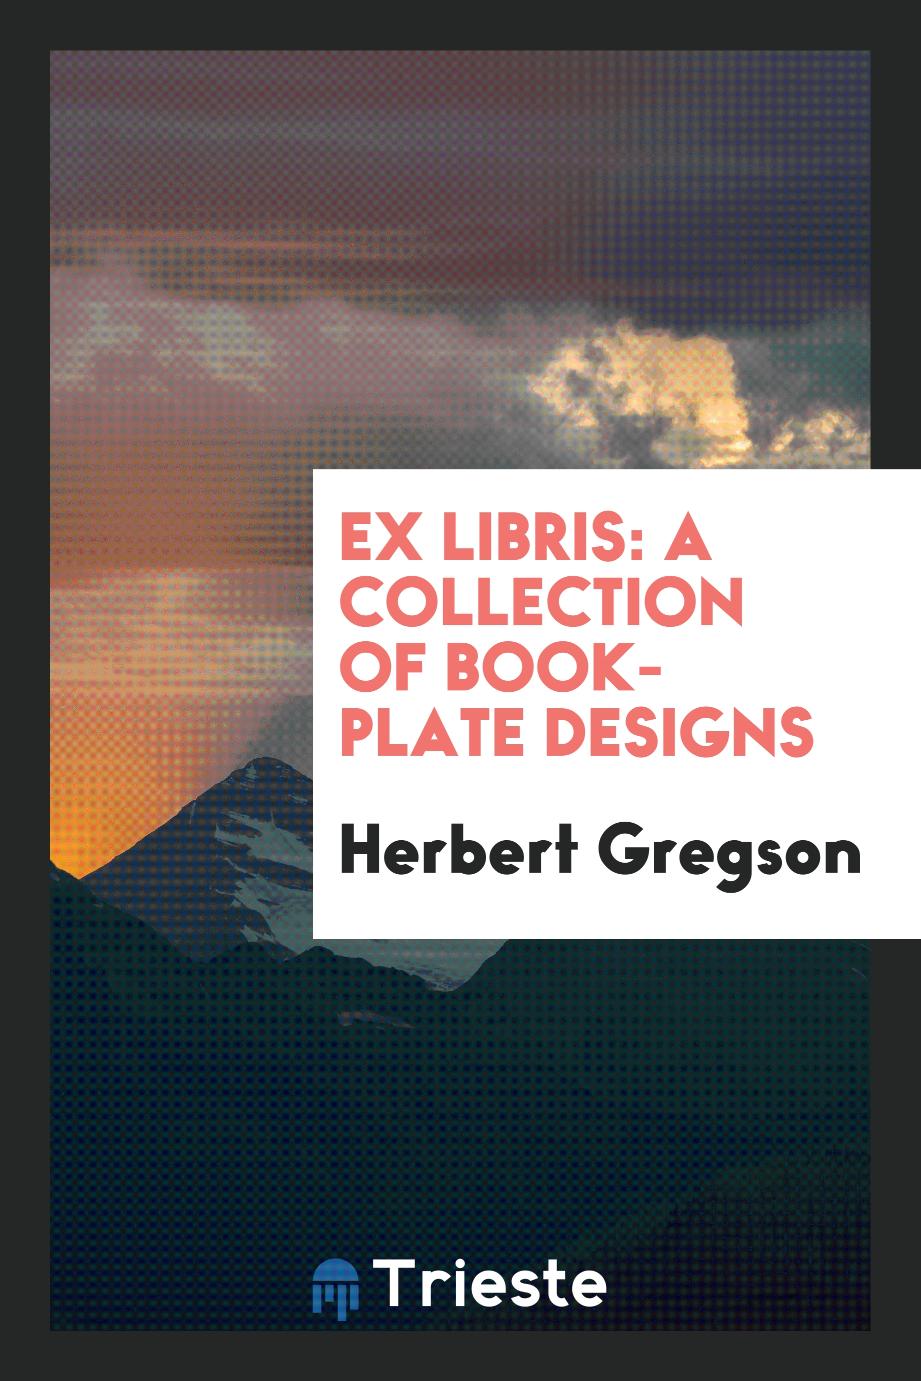 Ex Libris: A Collection of Book-plate Designs